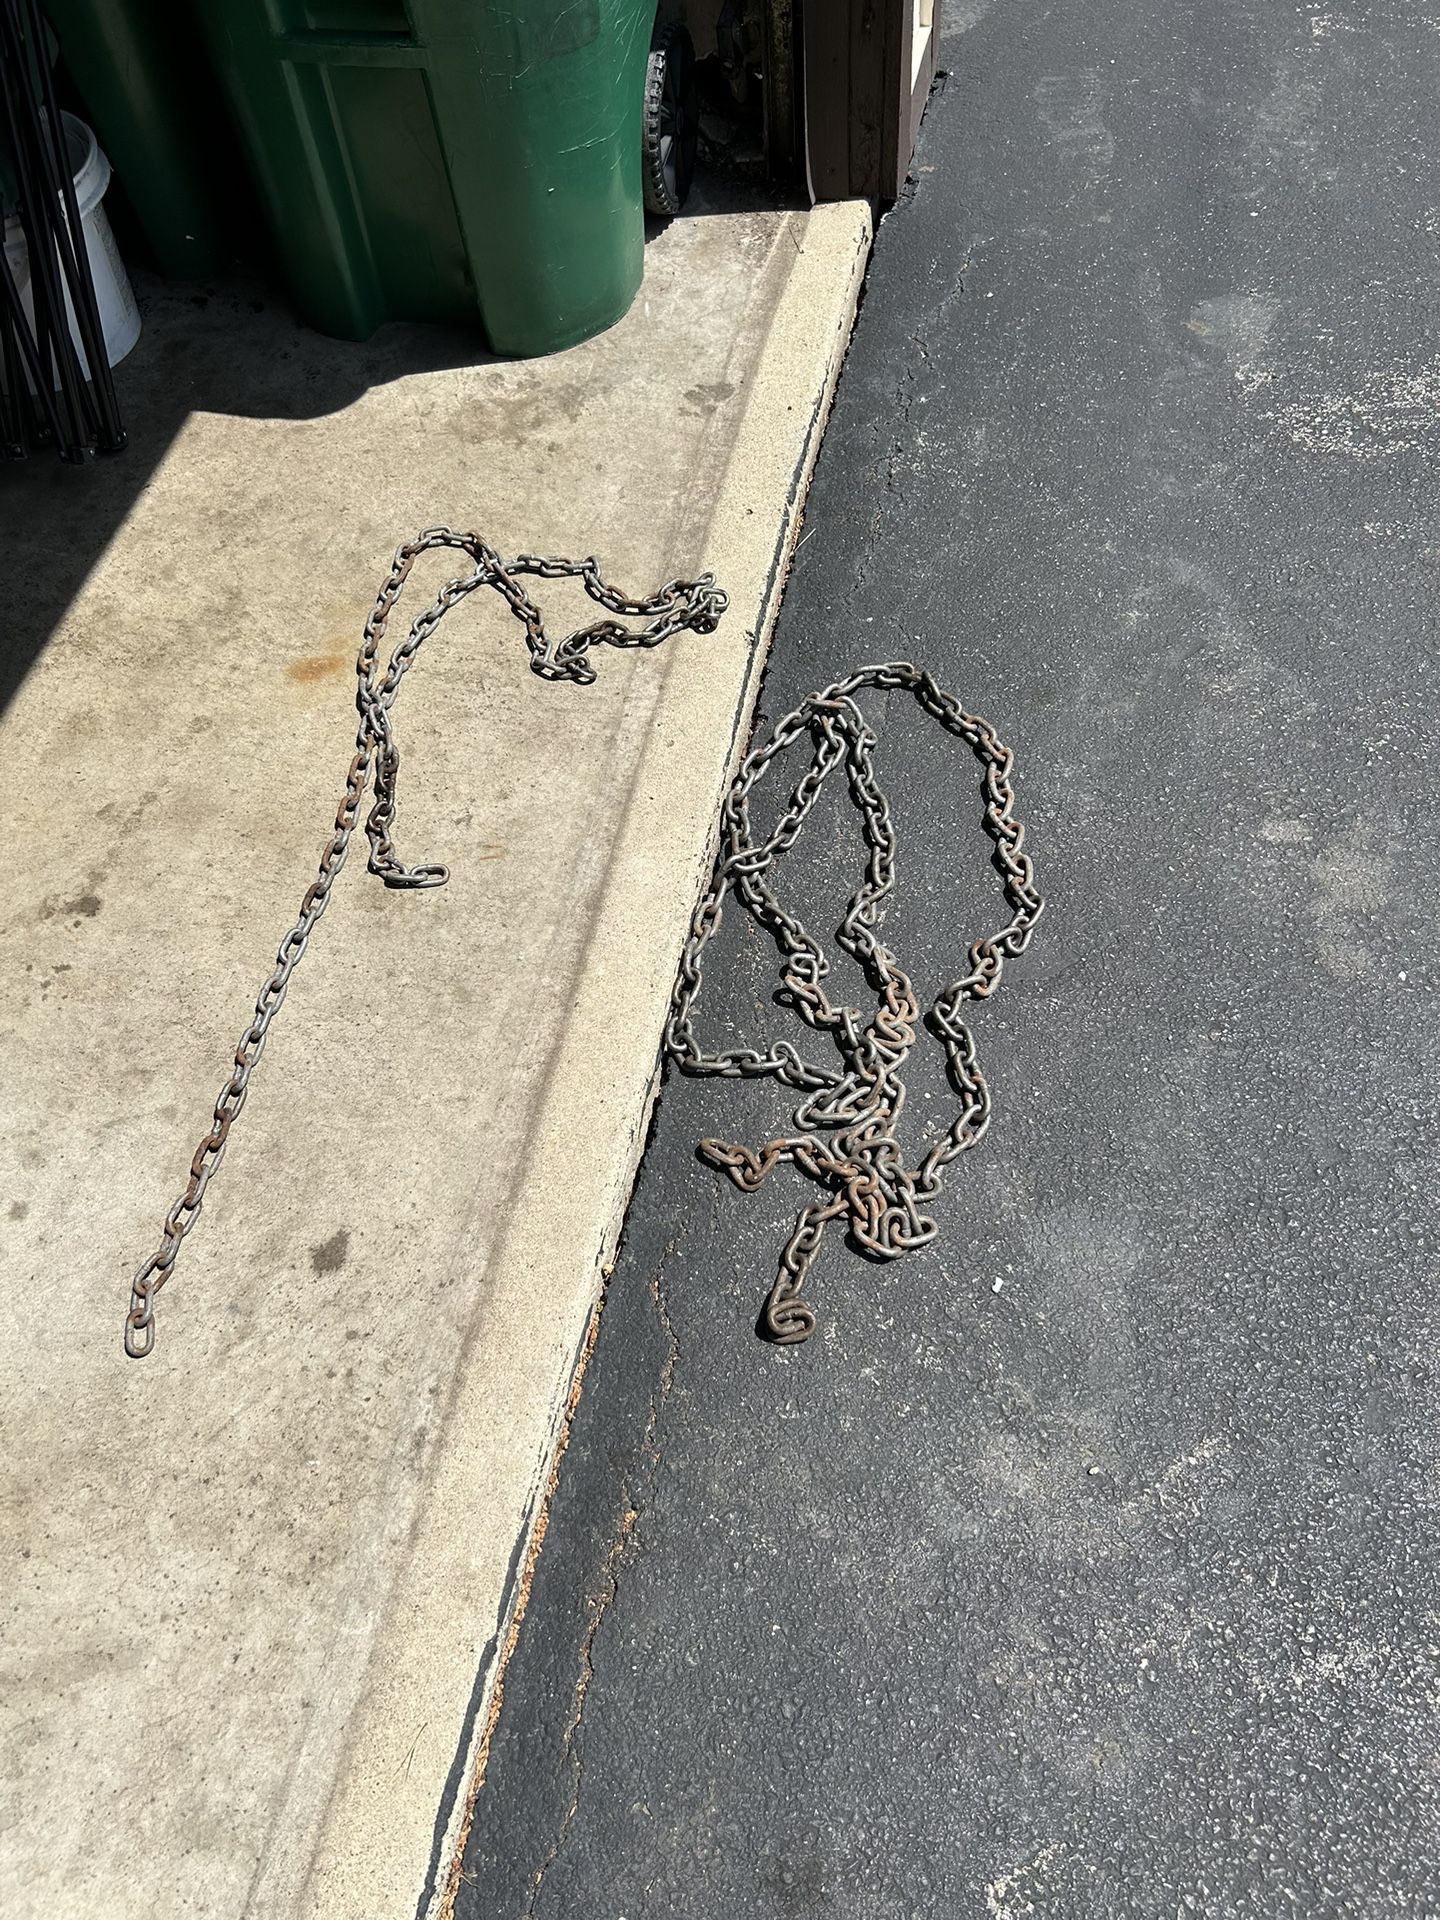 Two Chains... One Heavy Duty, The Other One Lighter Duty